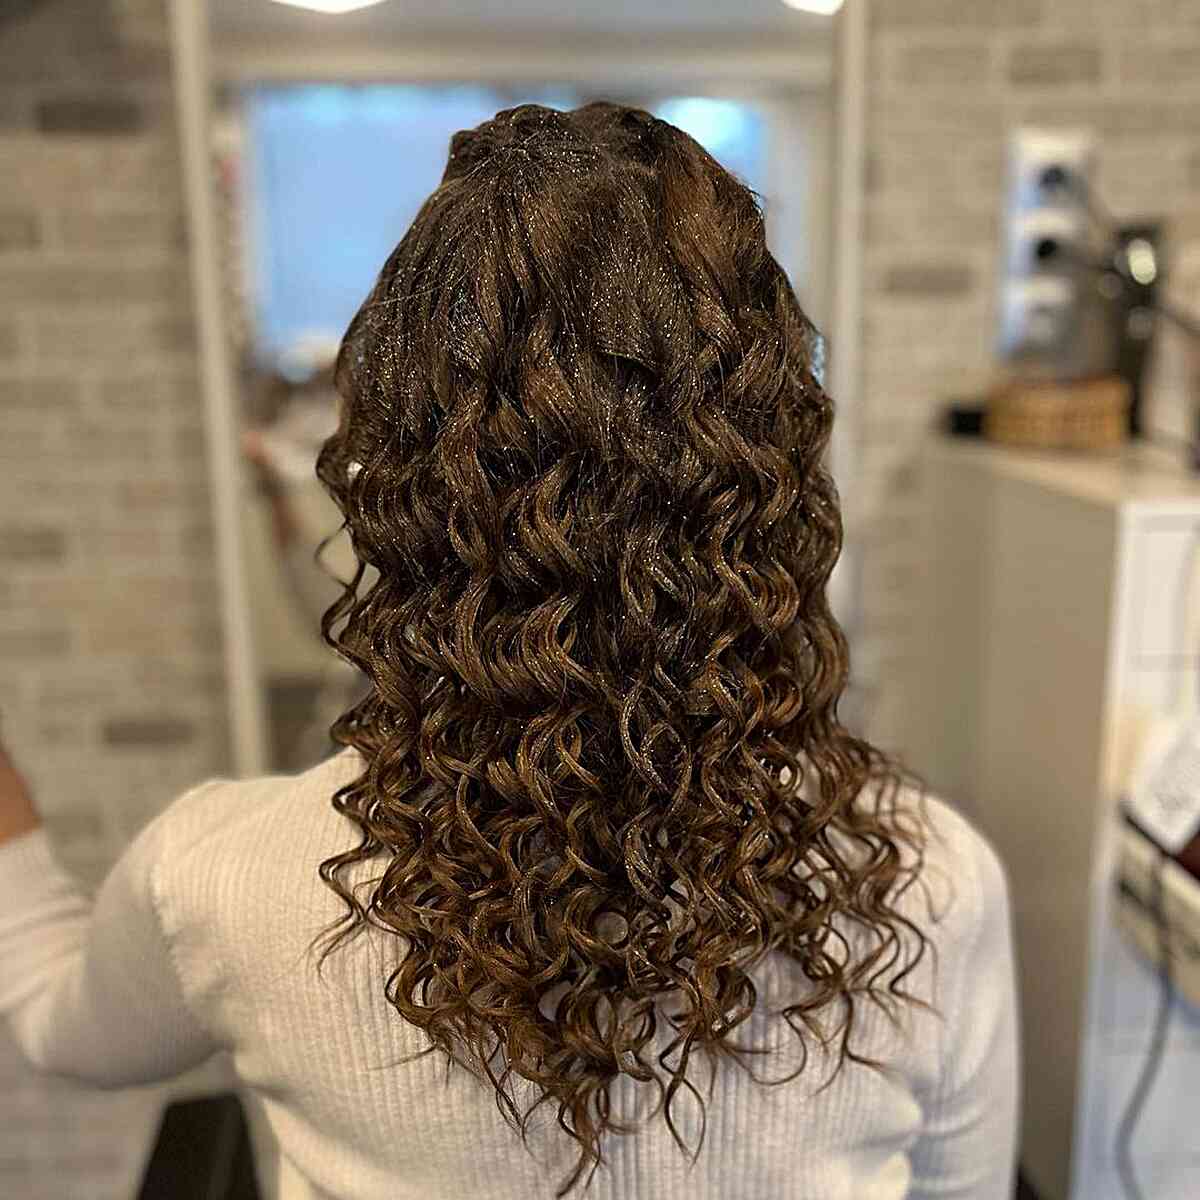 Medium-Length Thick Defined Curls with Double French Braids and U-Shaped Layers for Prom